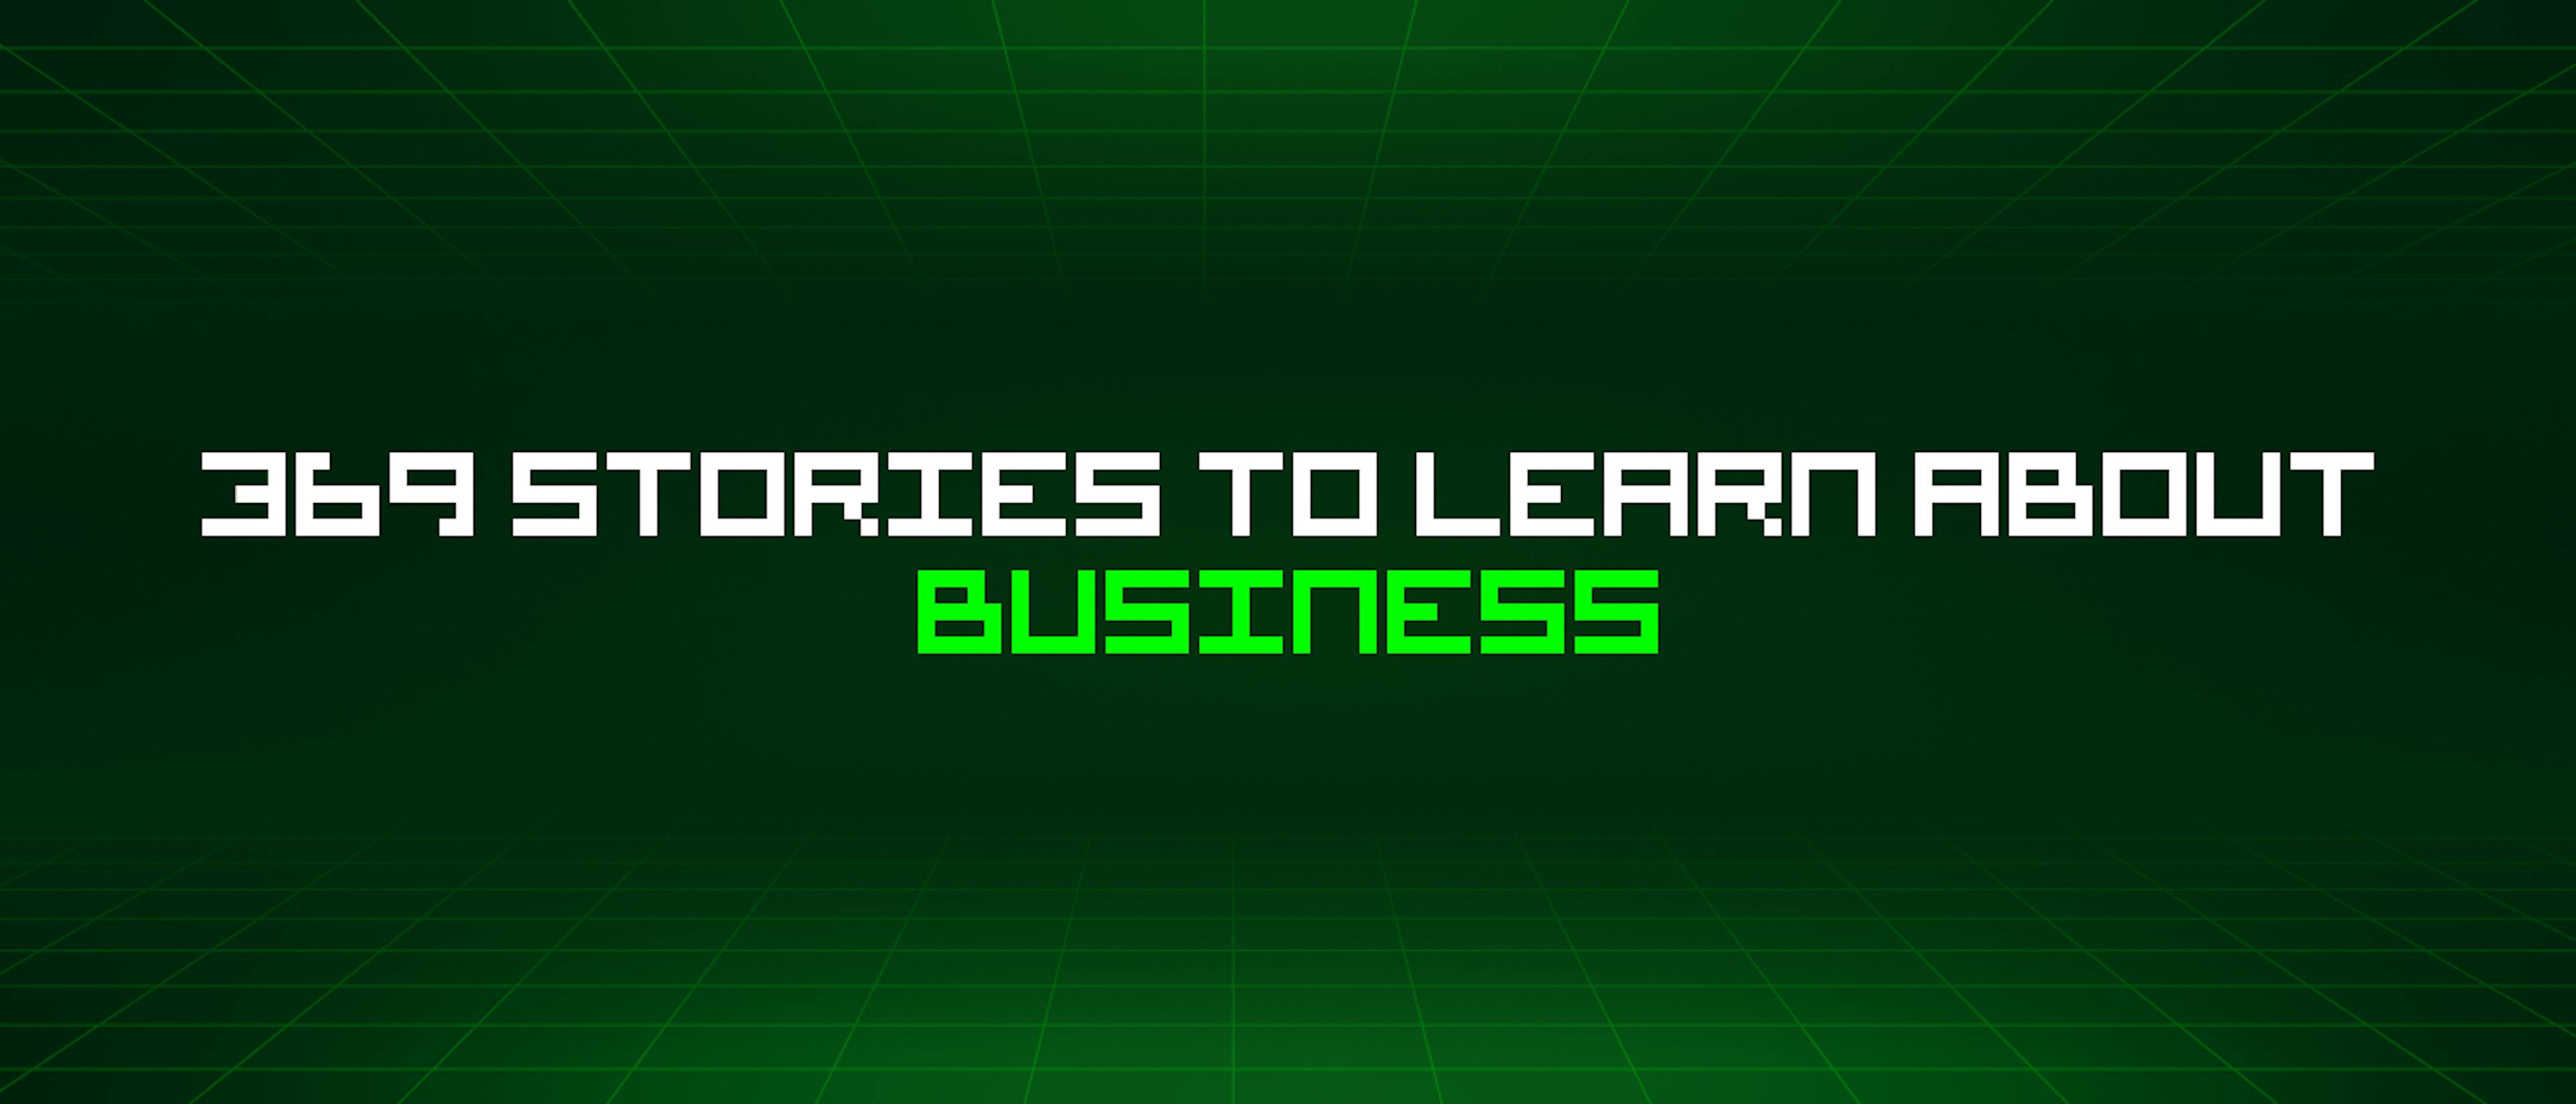 featured image - 369 Stories To Learn About Business